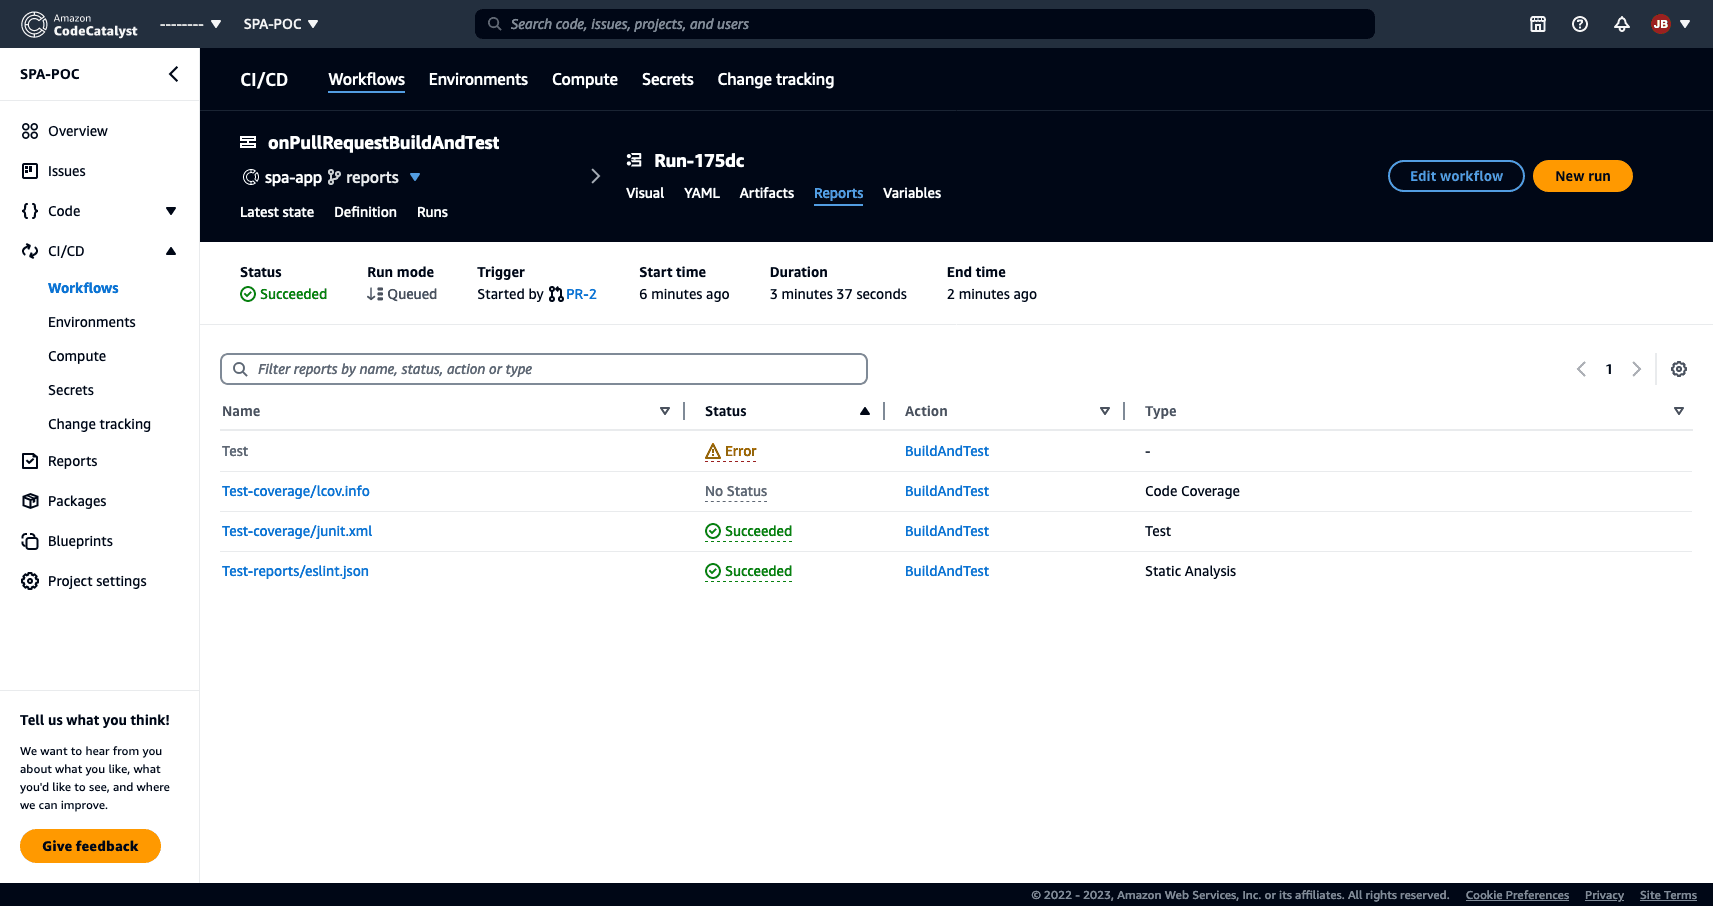 AWS CodeCatalyst page showing the reports associated with a specific run of a 'onPullRequestBuildAnd